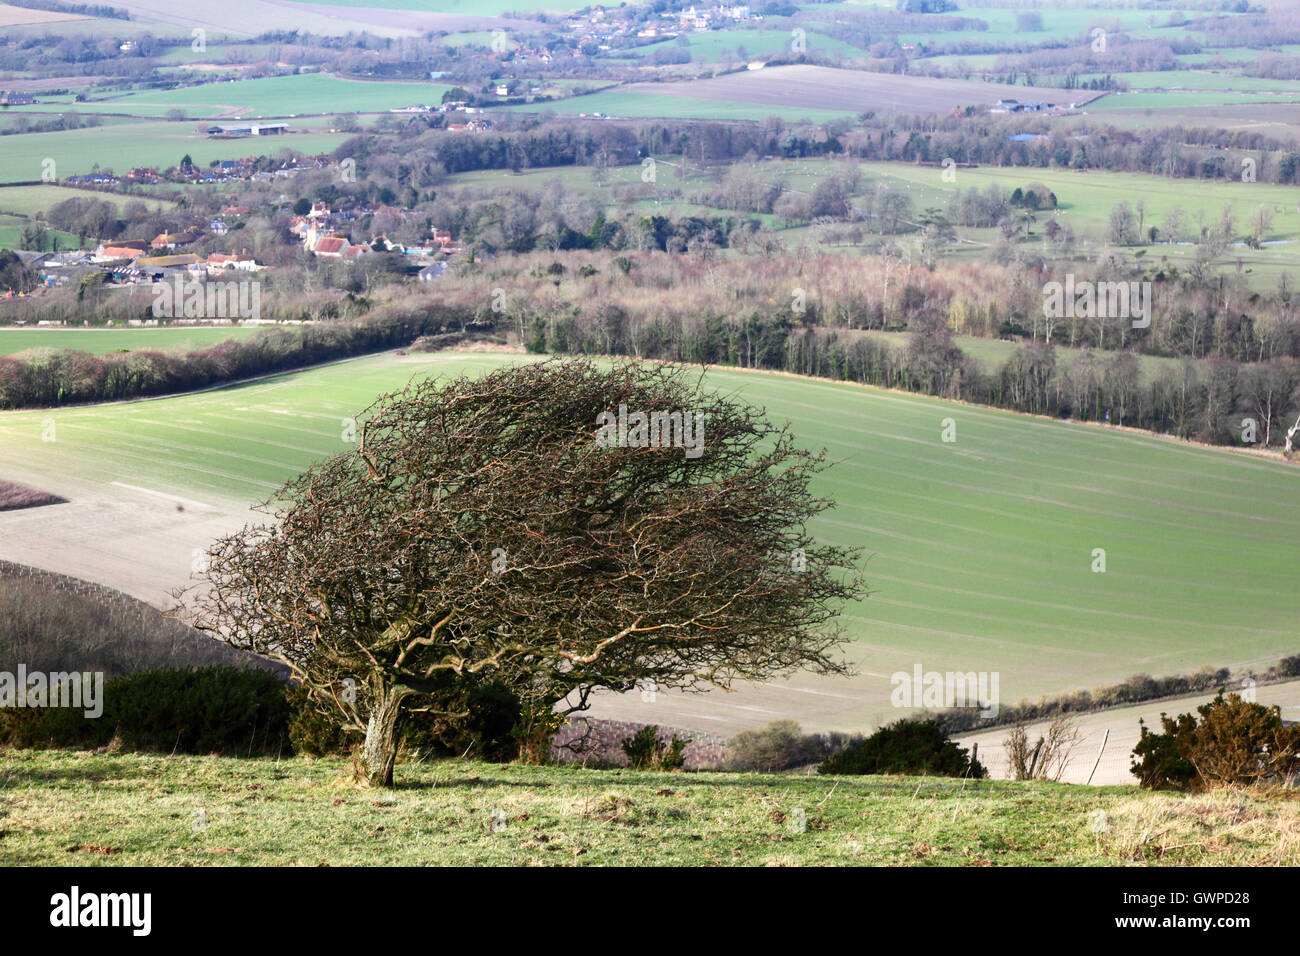 Ventoso prugnolo tree (Prunus spinosa, firle villaggio in background, South Downs national park, East Sussex, Inghilterra Foto Stock